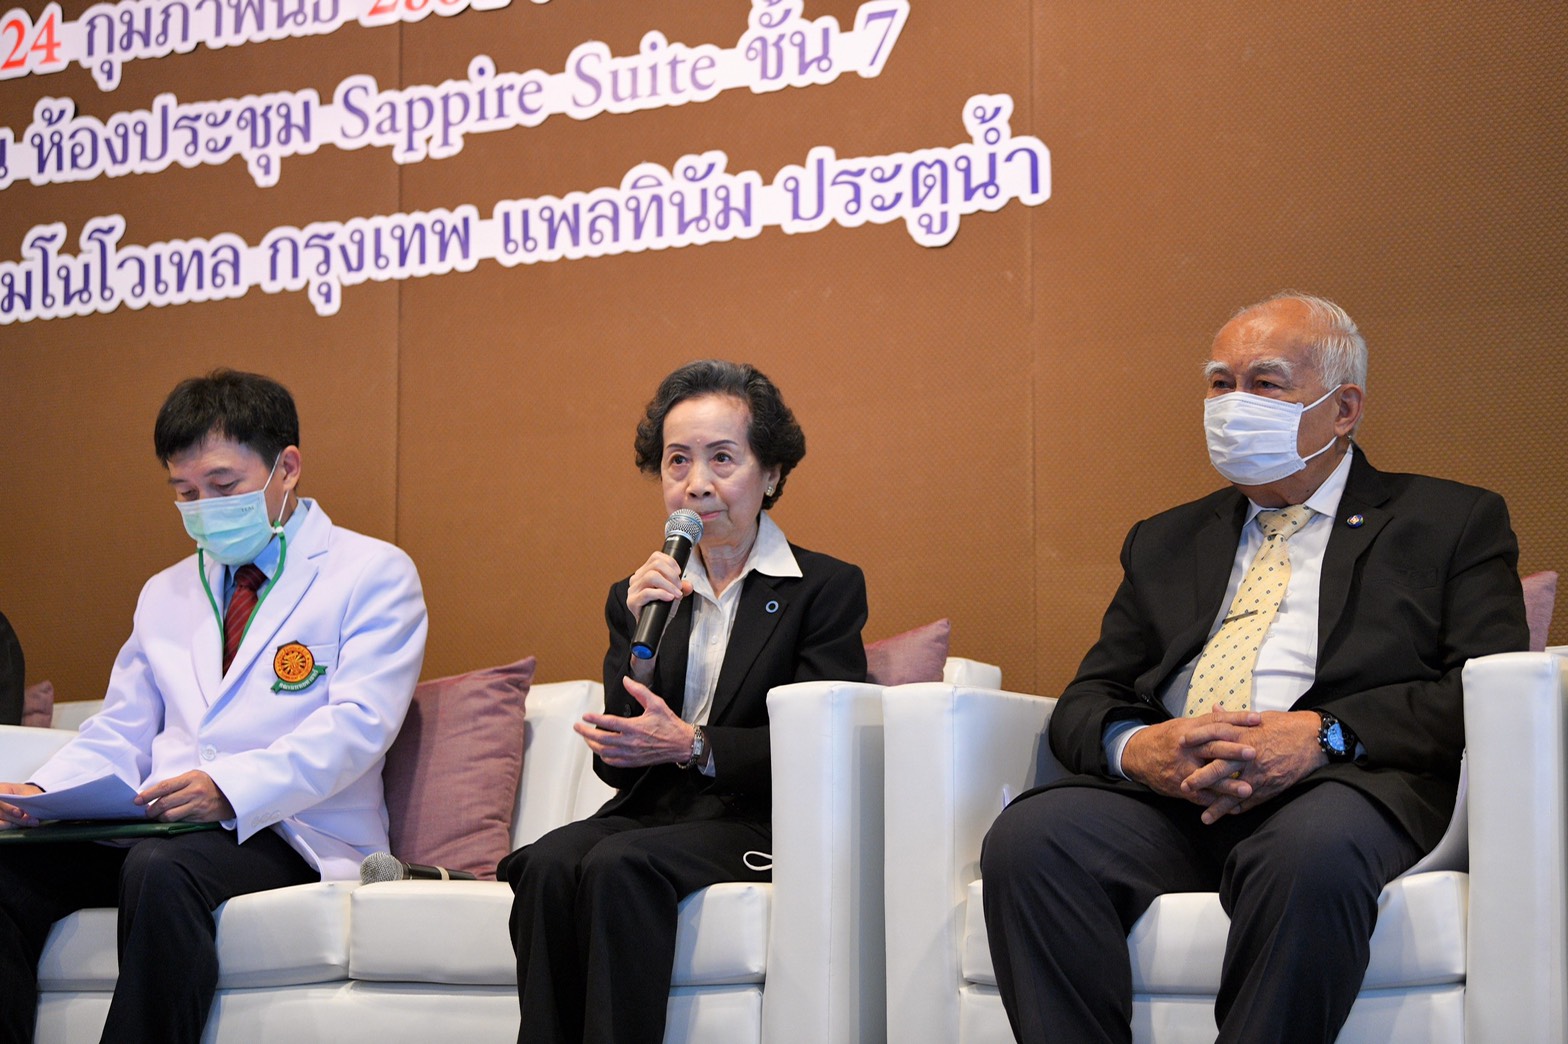 ThaiHealth pushes NCD Prevention Policy to National Agenda thaihealth